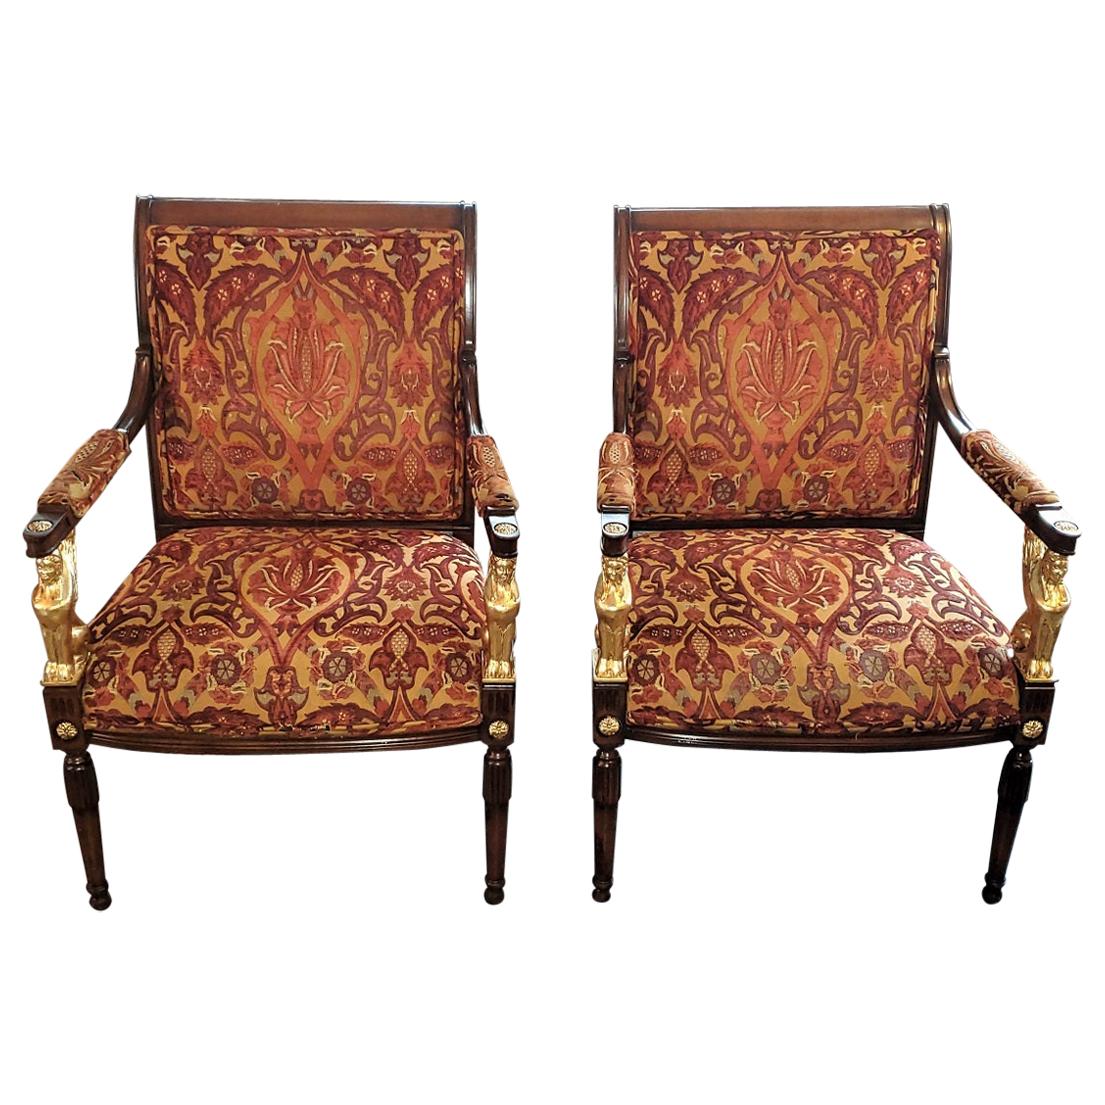 Pair of Egyptian Revival Armchairs